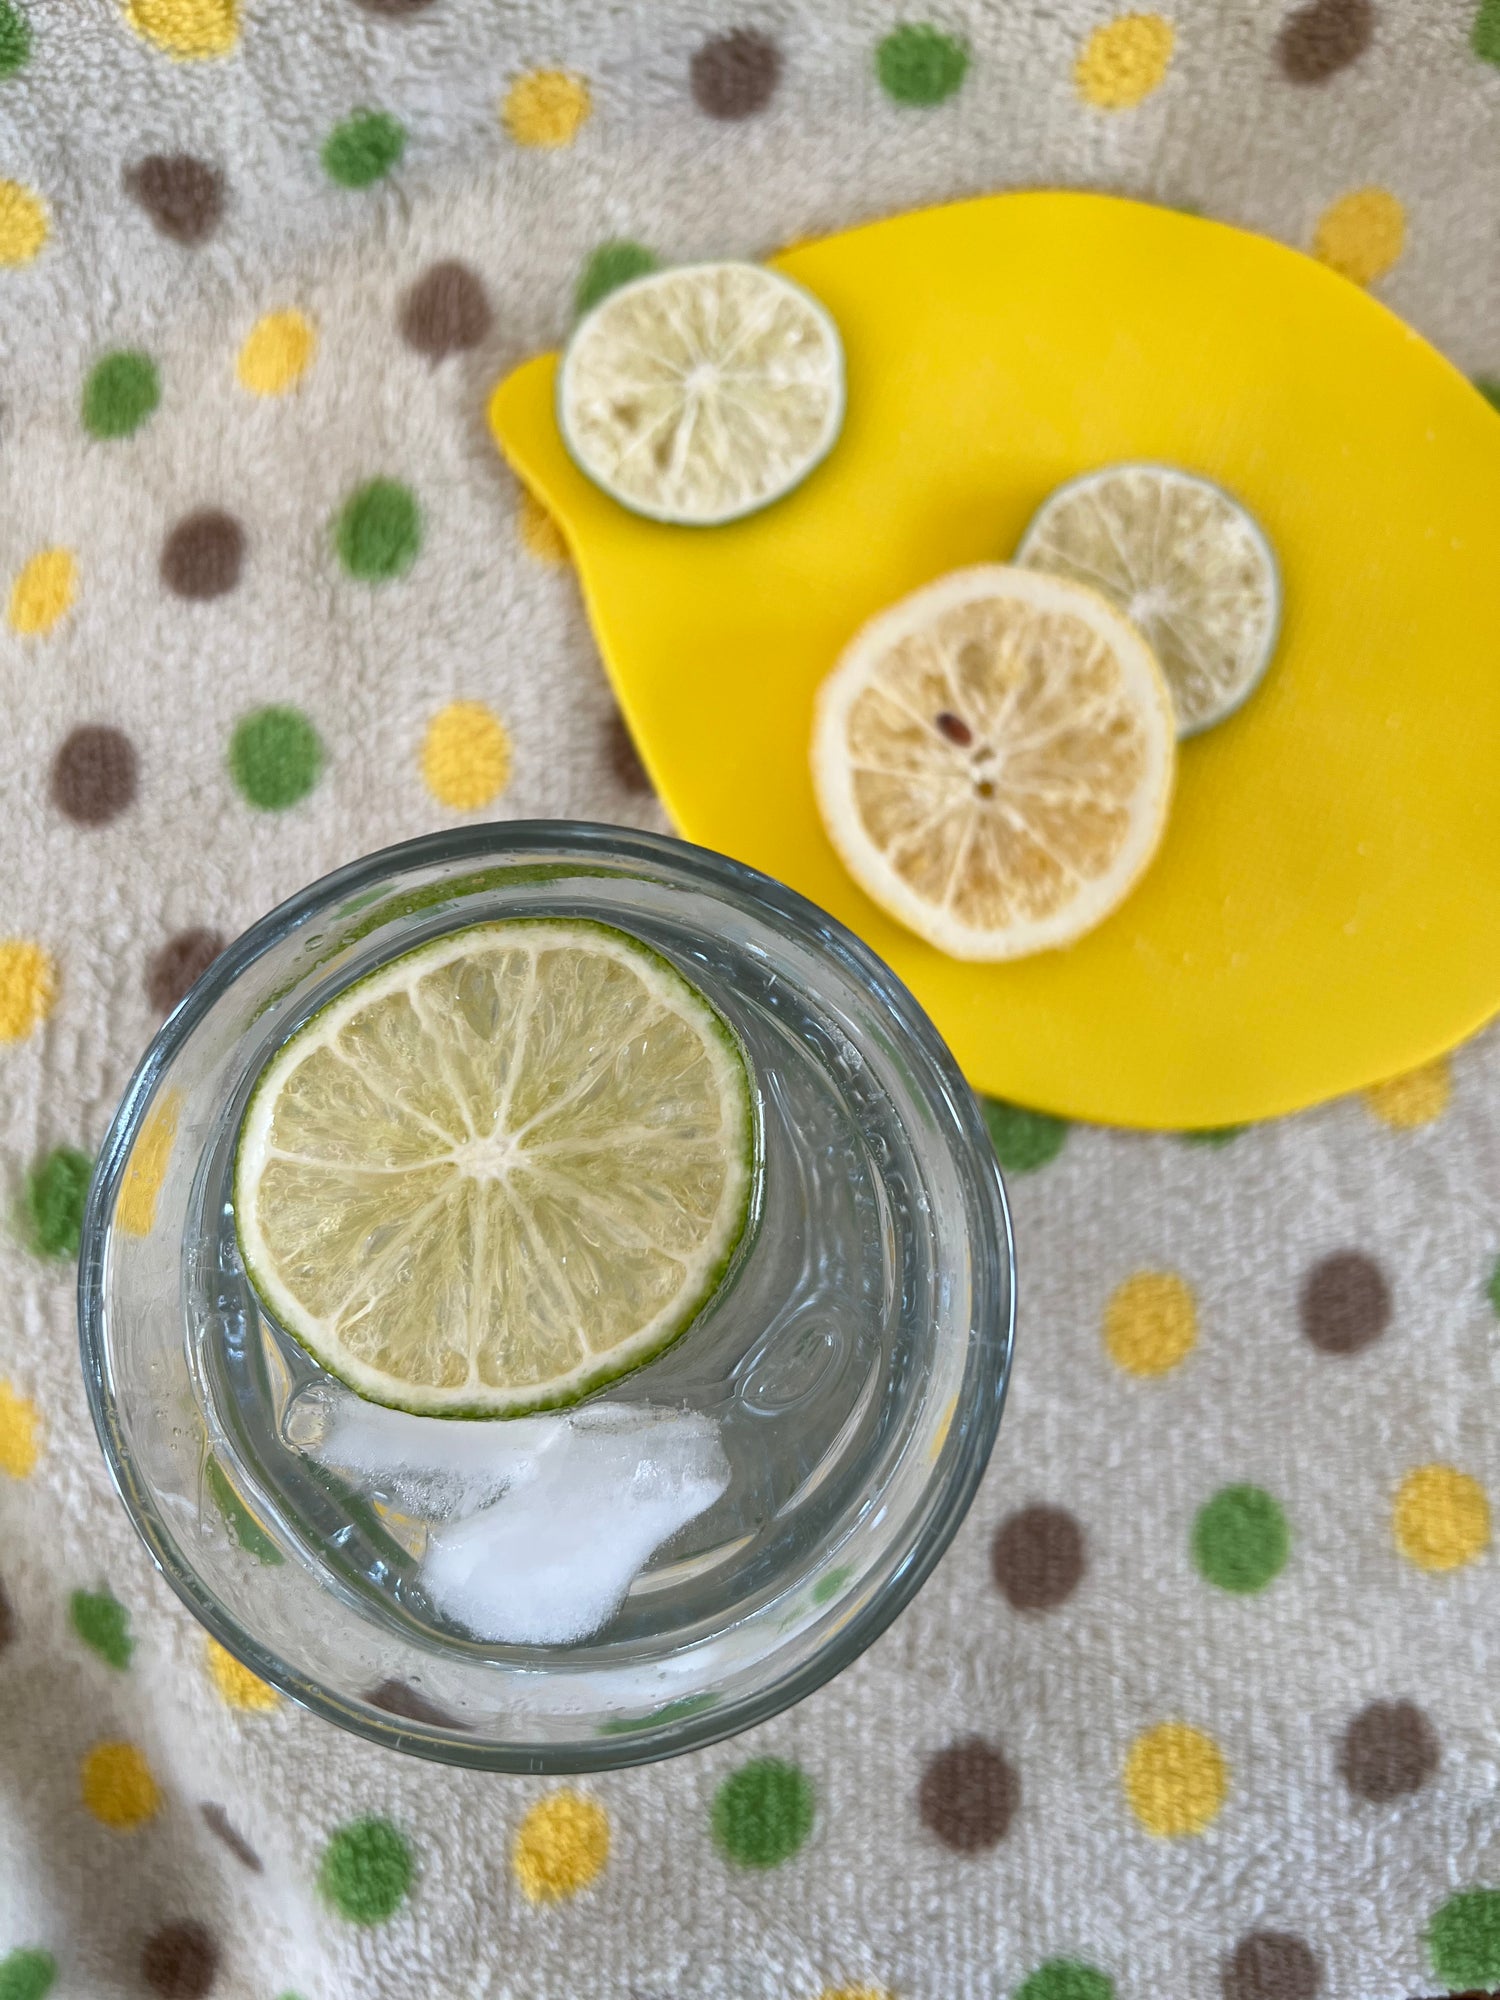 Top view glass of water with lime slice beside other lemon and lime slices